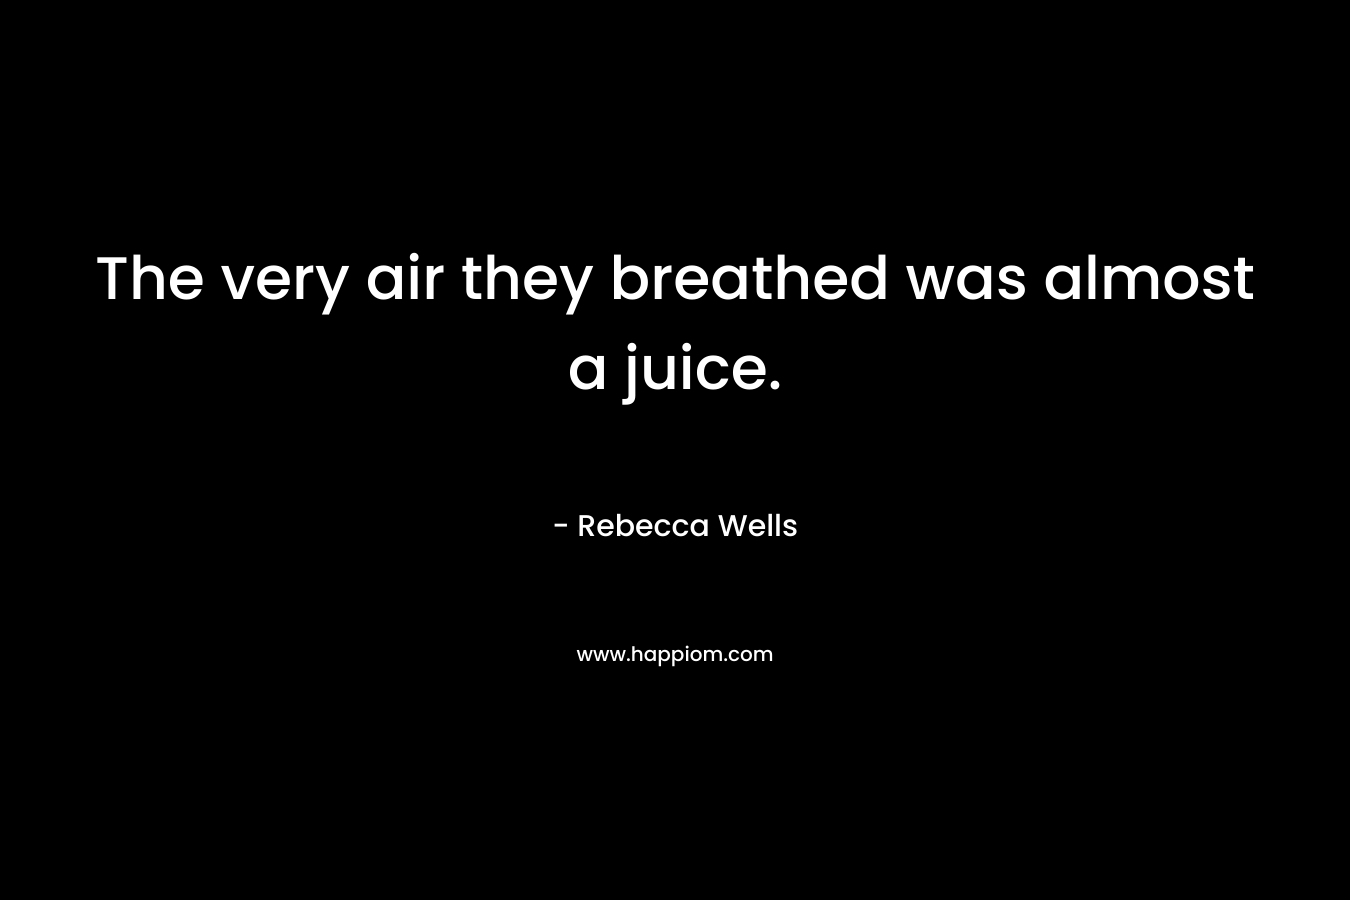 The very air they breathed was almost a juice. – Rebecca Wells